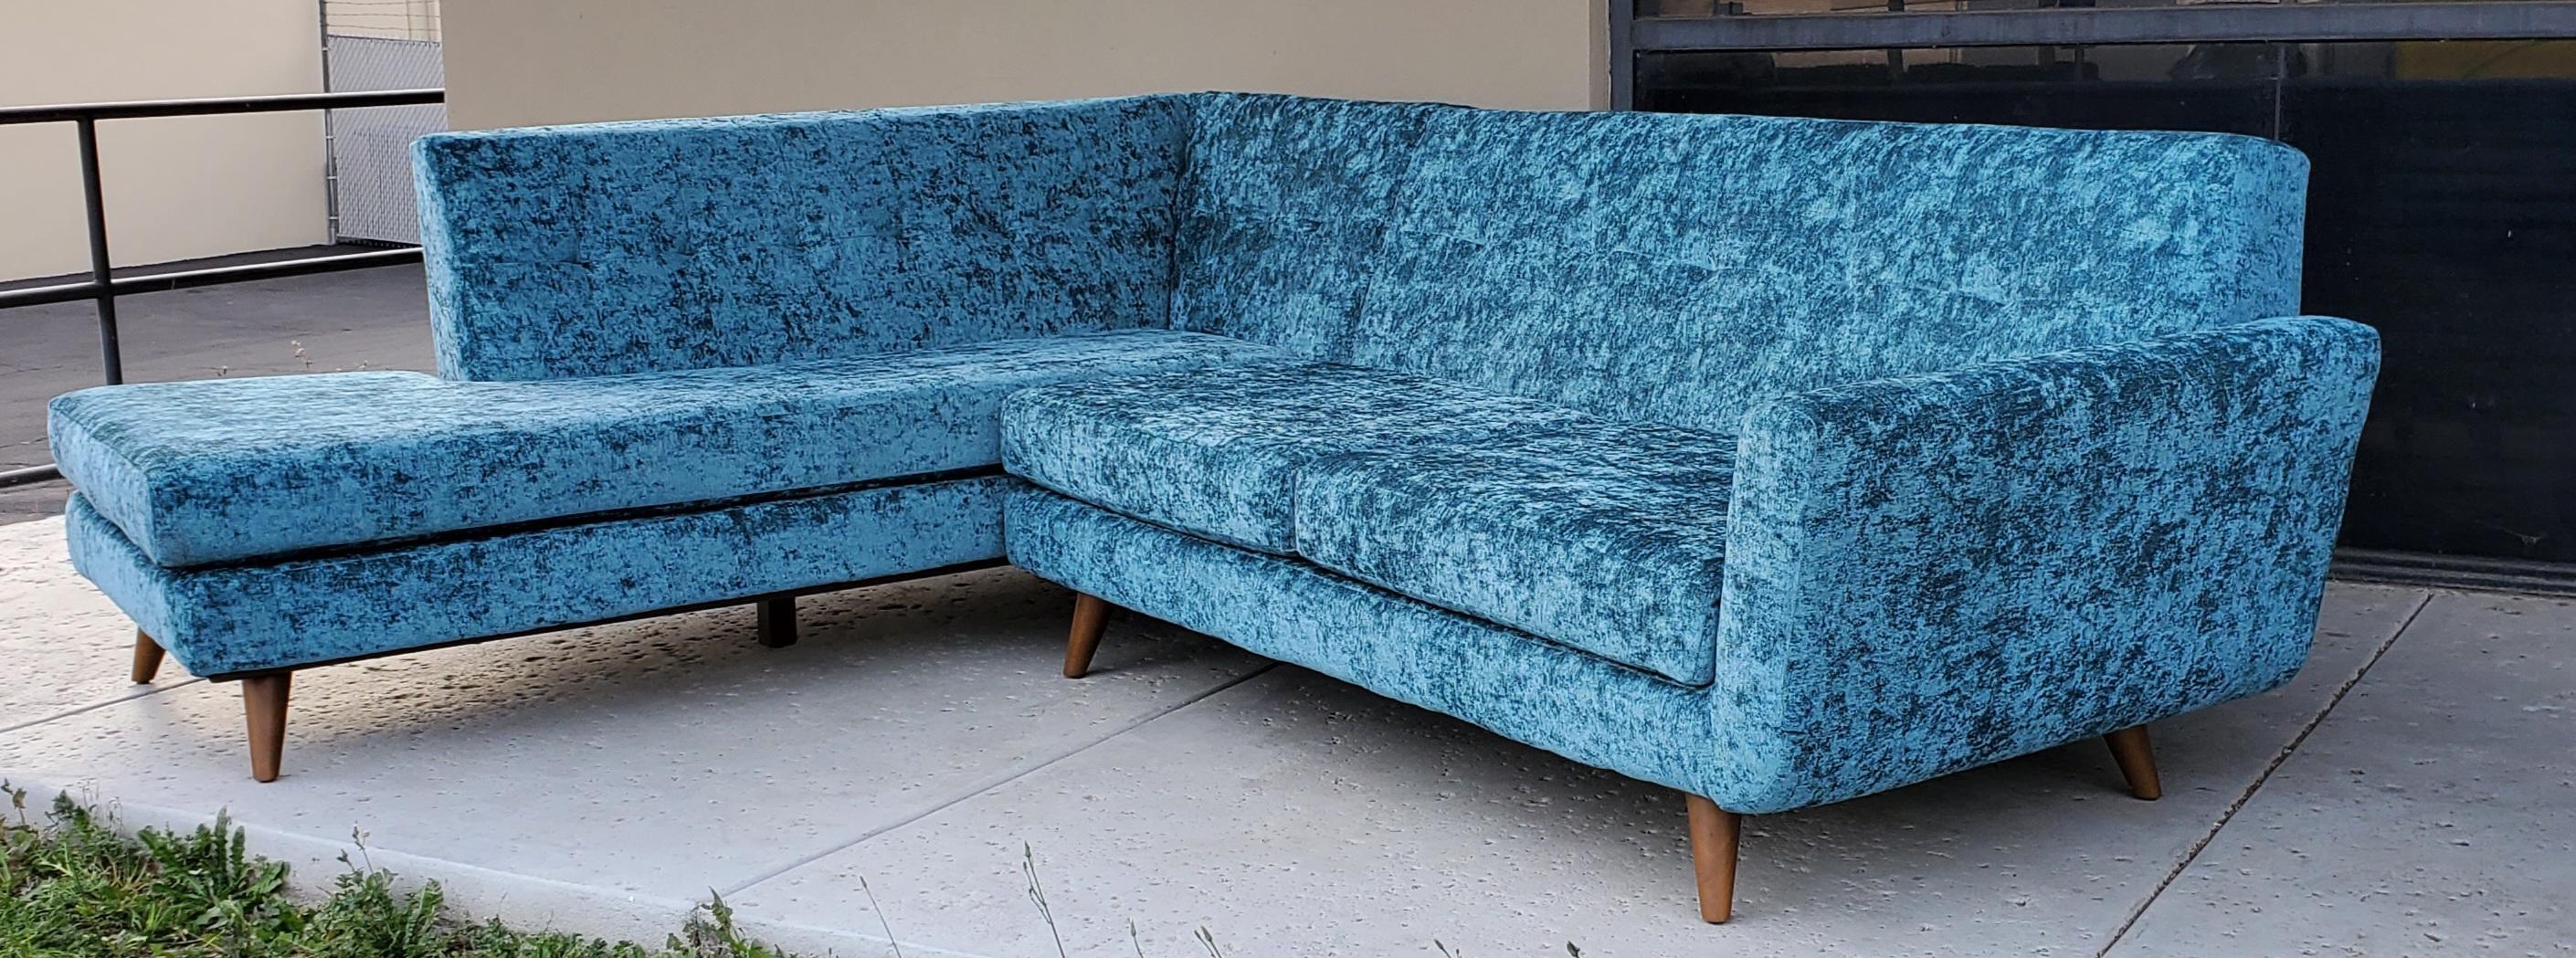 60s Low Slung Style Sectional Tapered Legs Aqua Green Crushed Velvet Upholstery For Sale 6